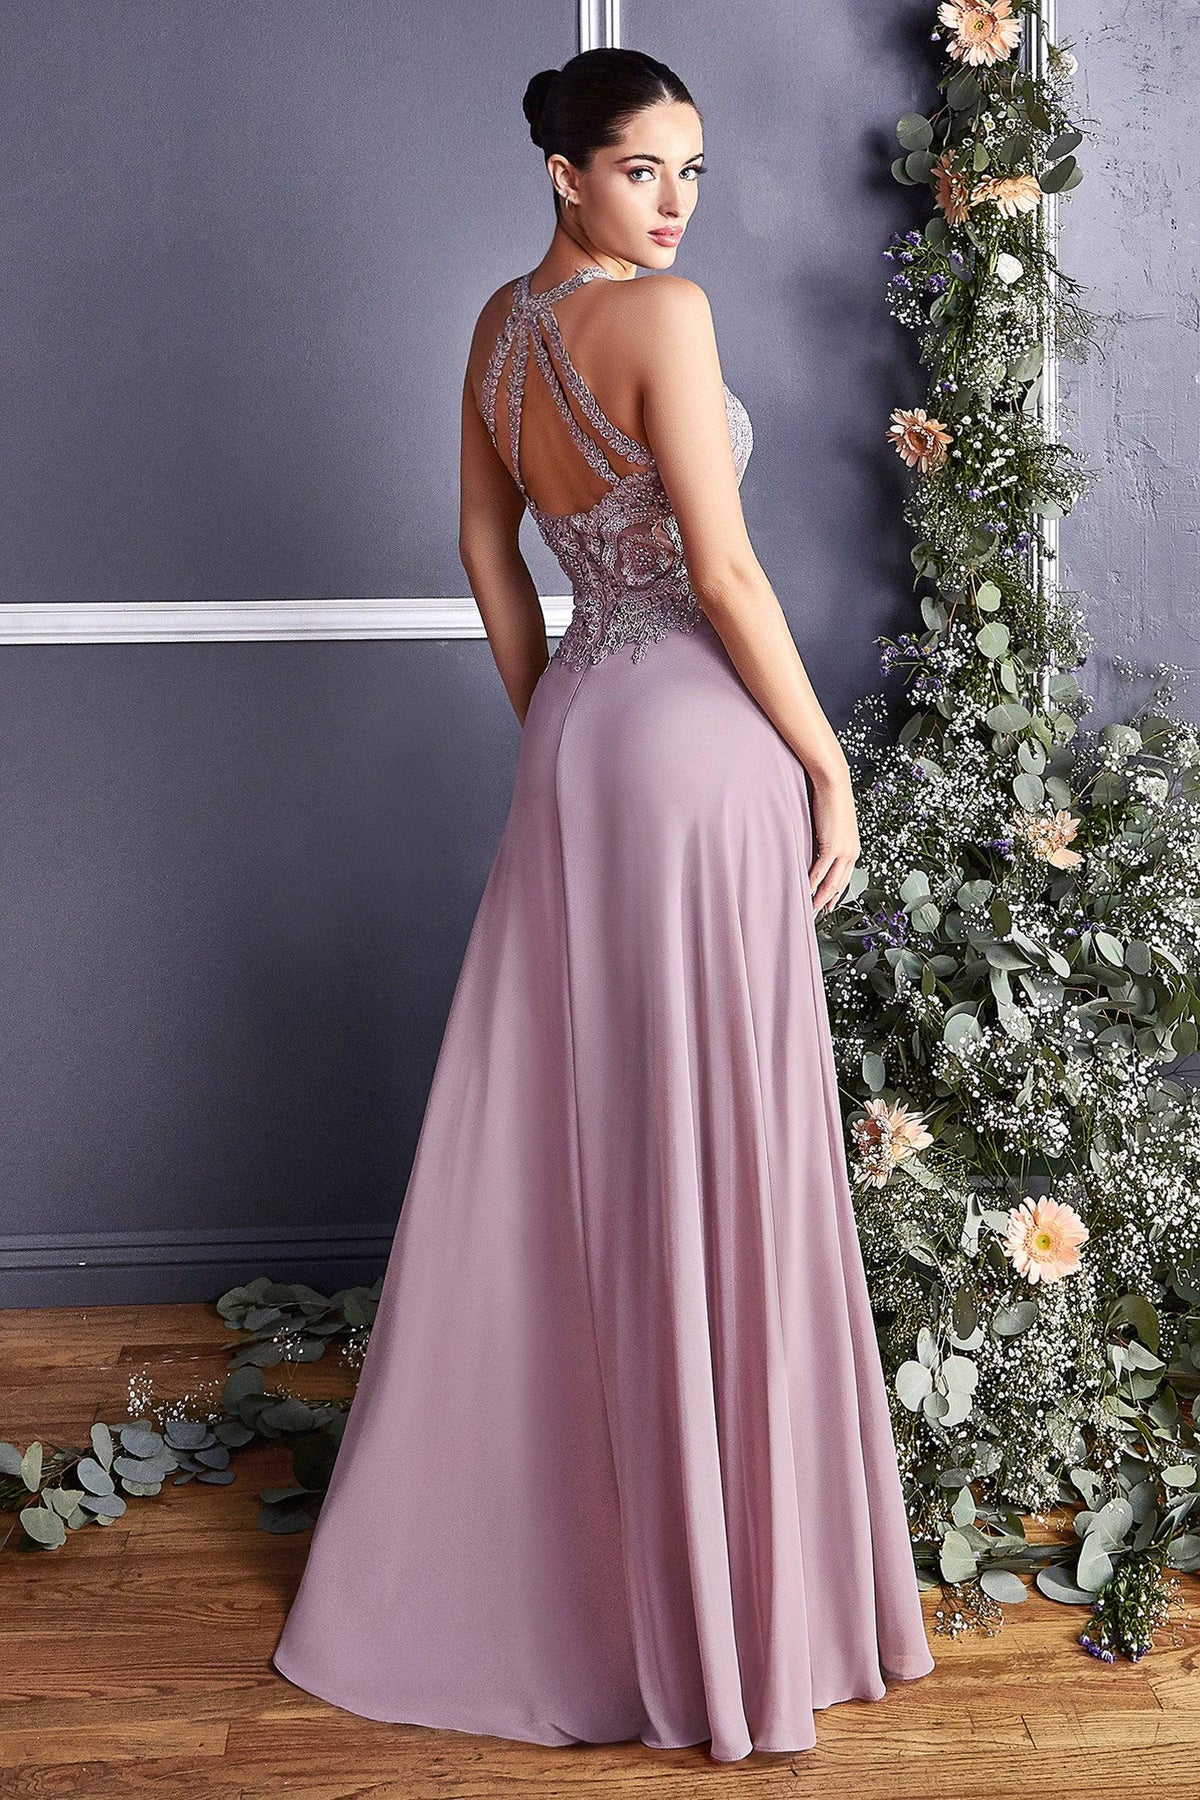 Stunning Long Gown with Embroidered Halter Top Neckline and Flowy Skirt #CDUJ0120 - NORMA REED